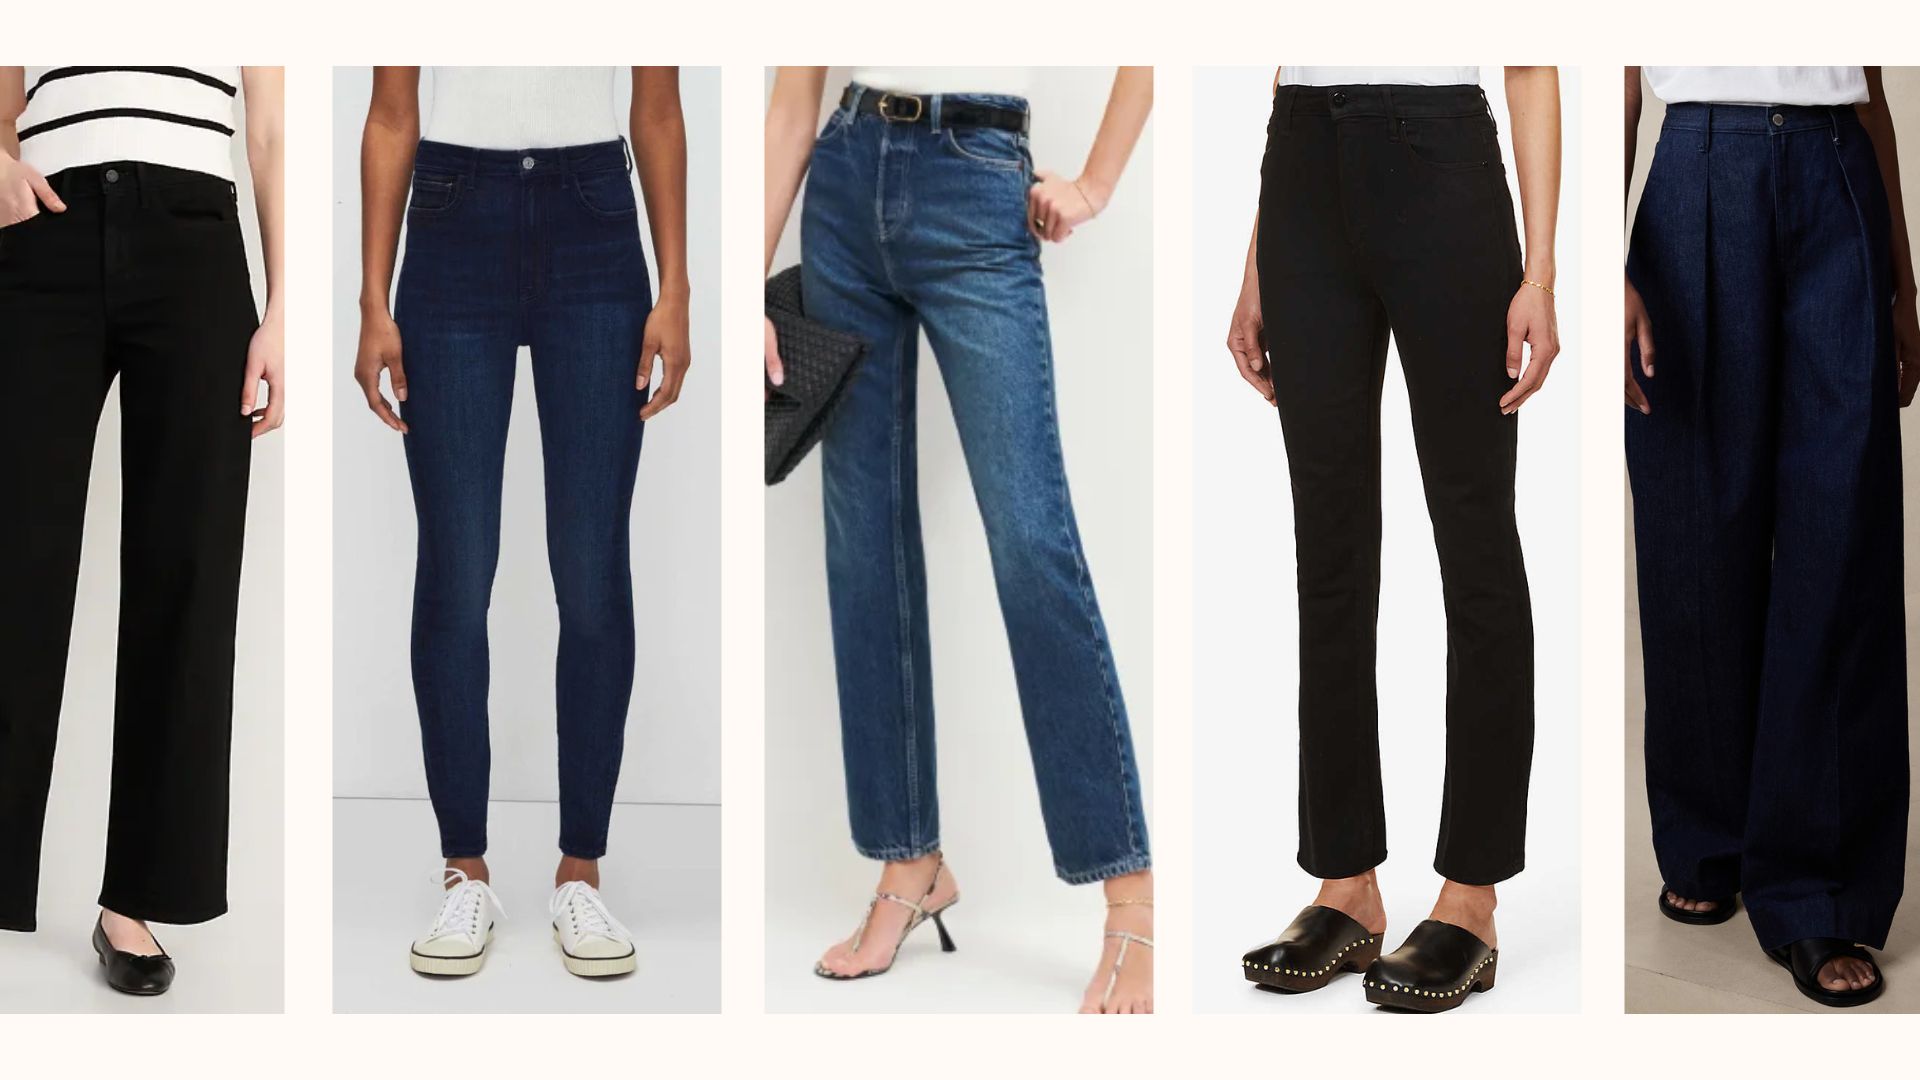 Tag et bad Landskab Opstå Here's how to style jeans for the Quiet Luxury trend | Woman & Home